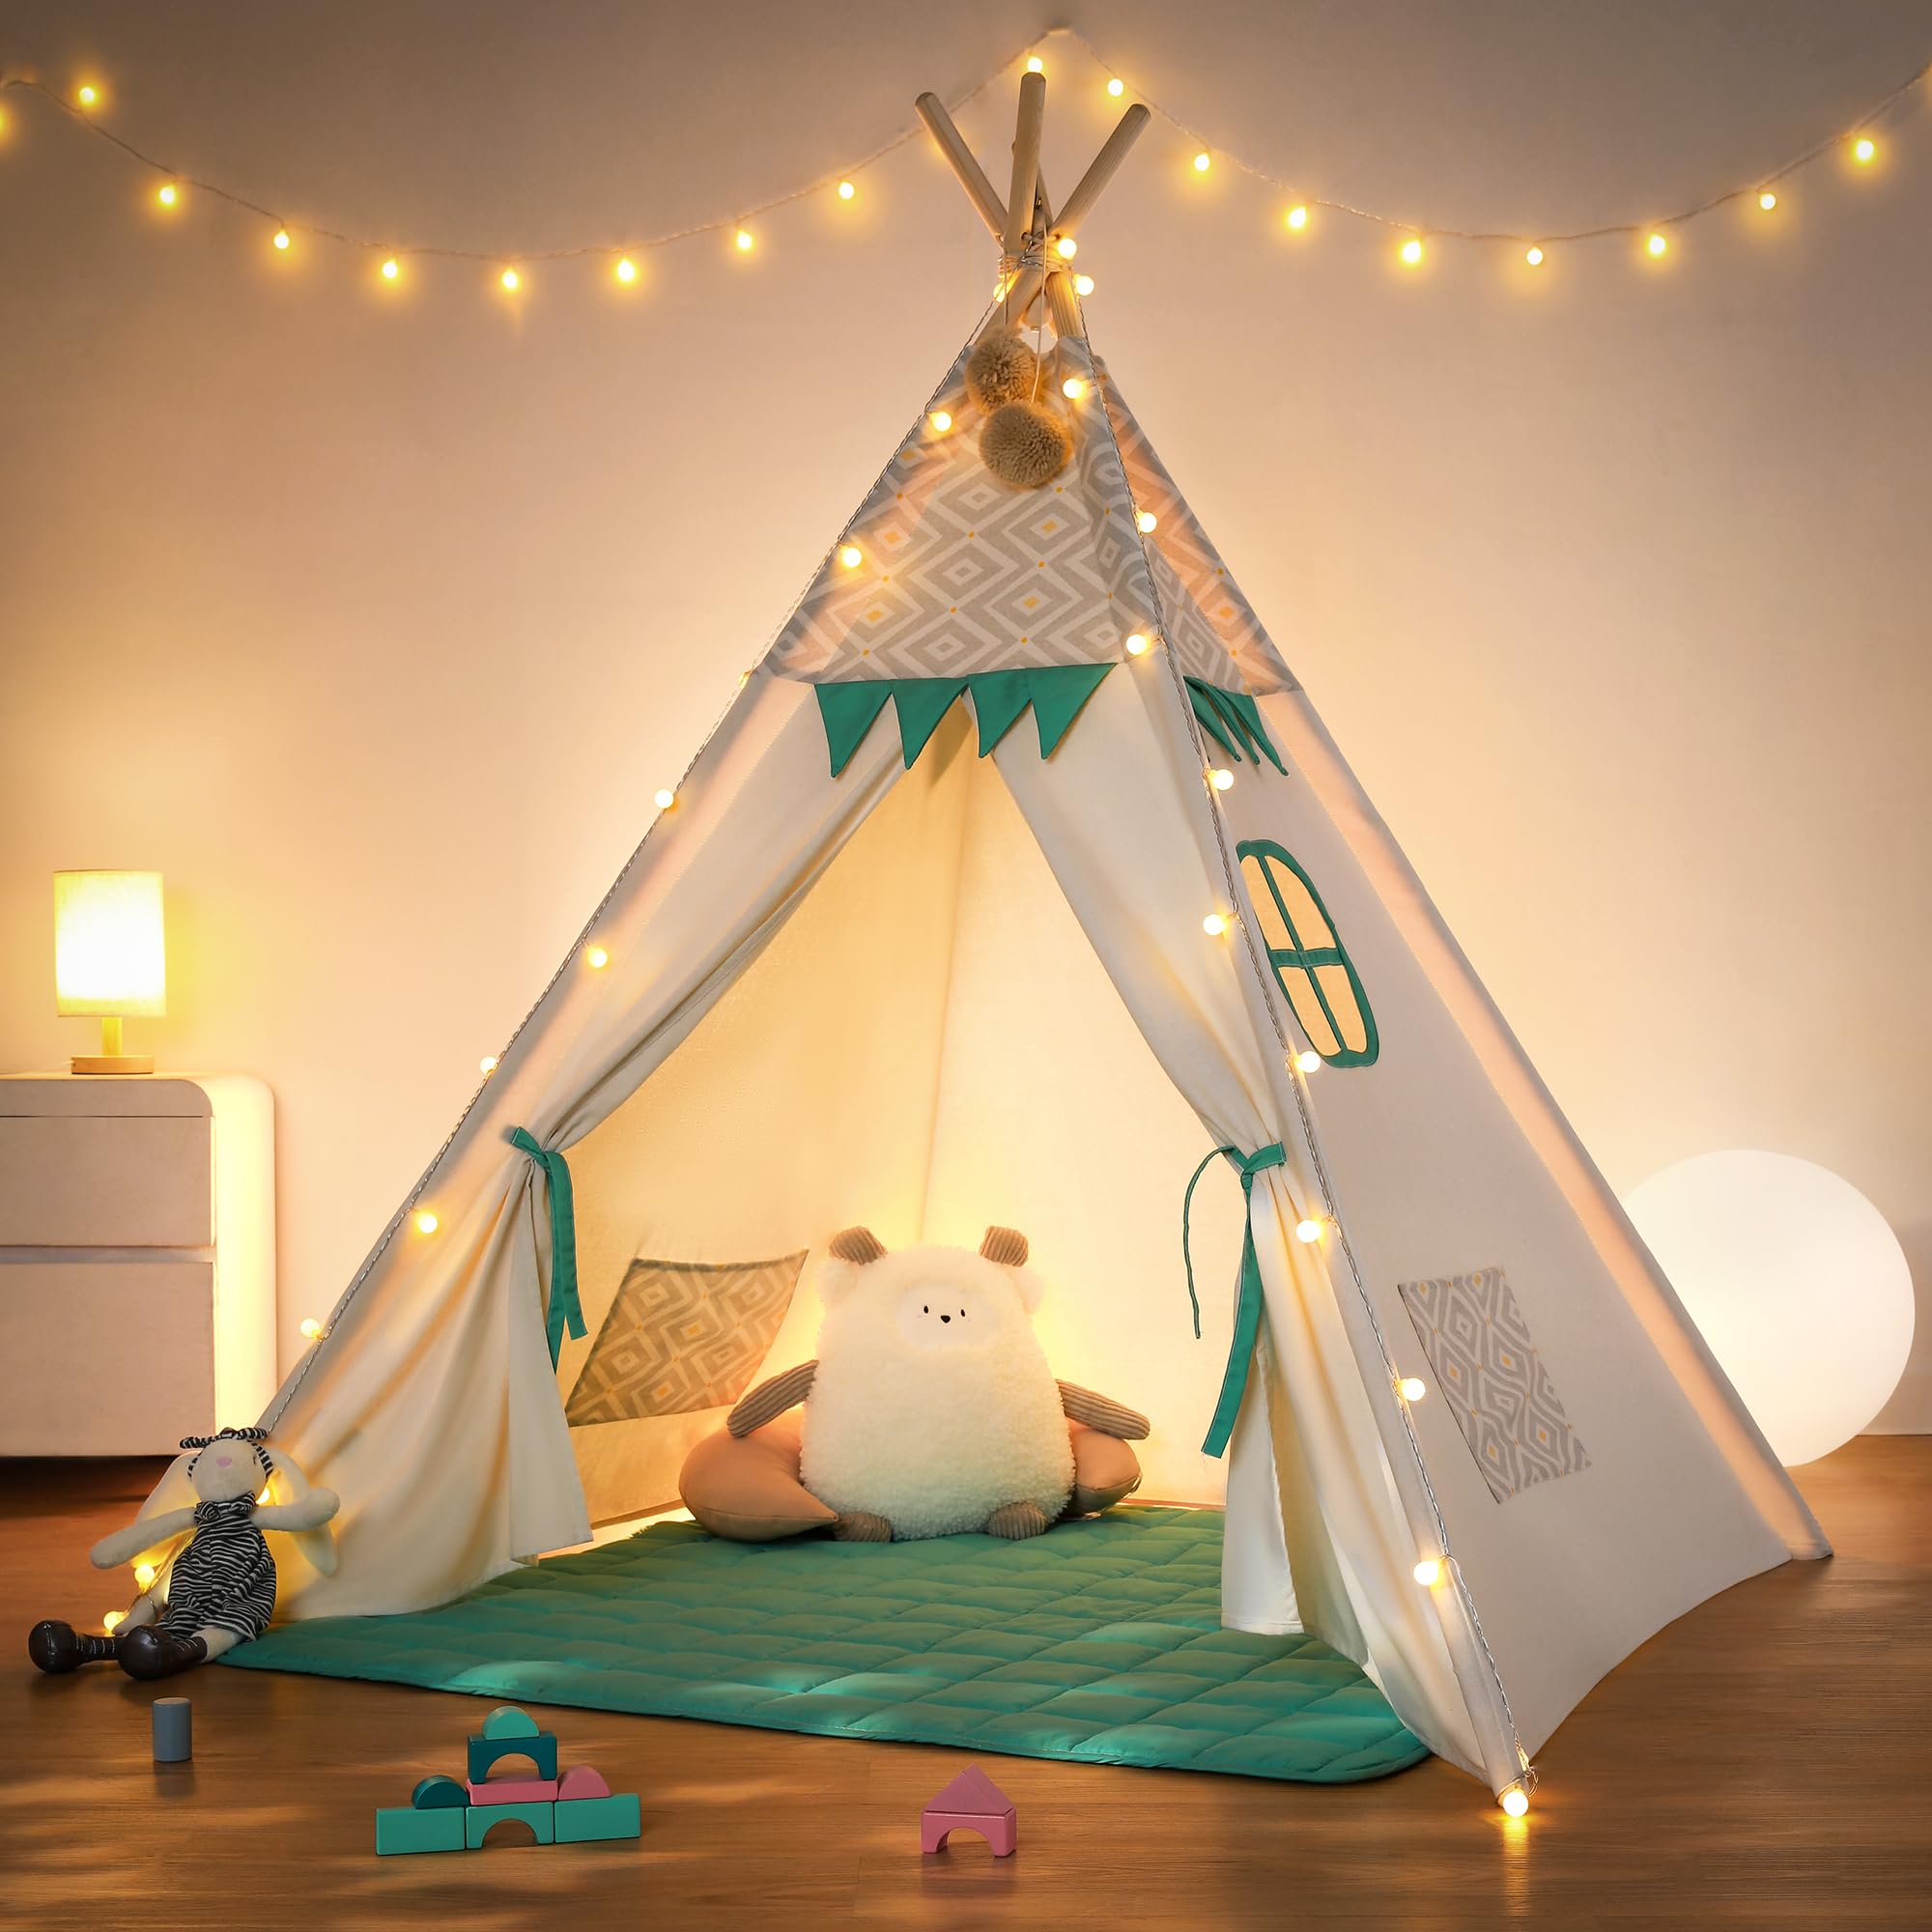 besrey Teepee Tent for Kids with Padded Mat&Light String, Besrey Kids Tents Indoor Playhouse, Large KidsTipi Tent, Play Tent for Toddle